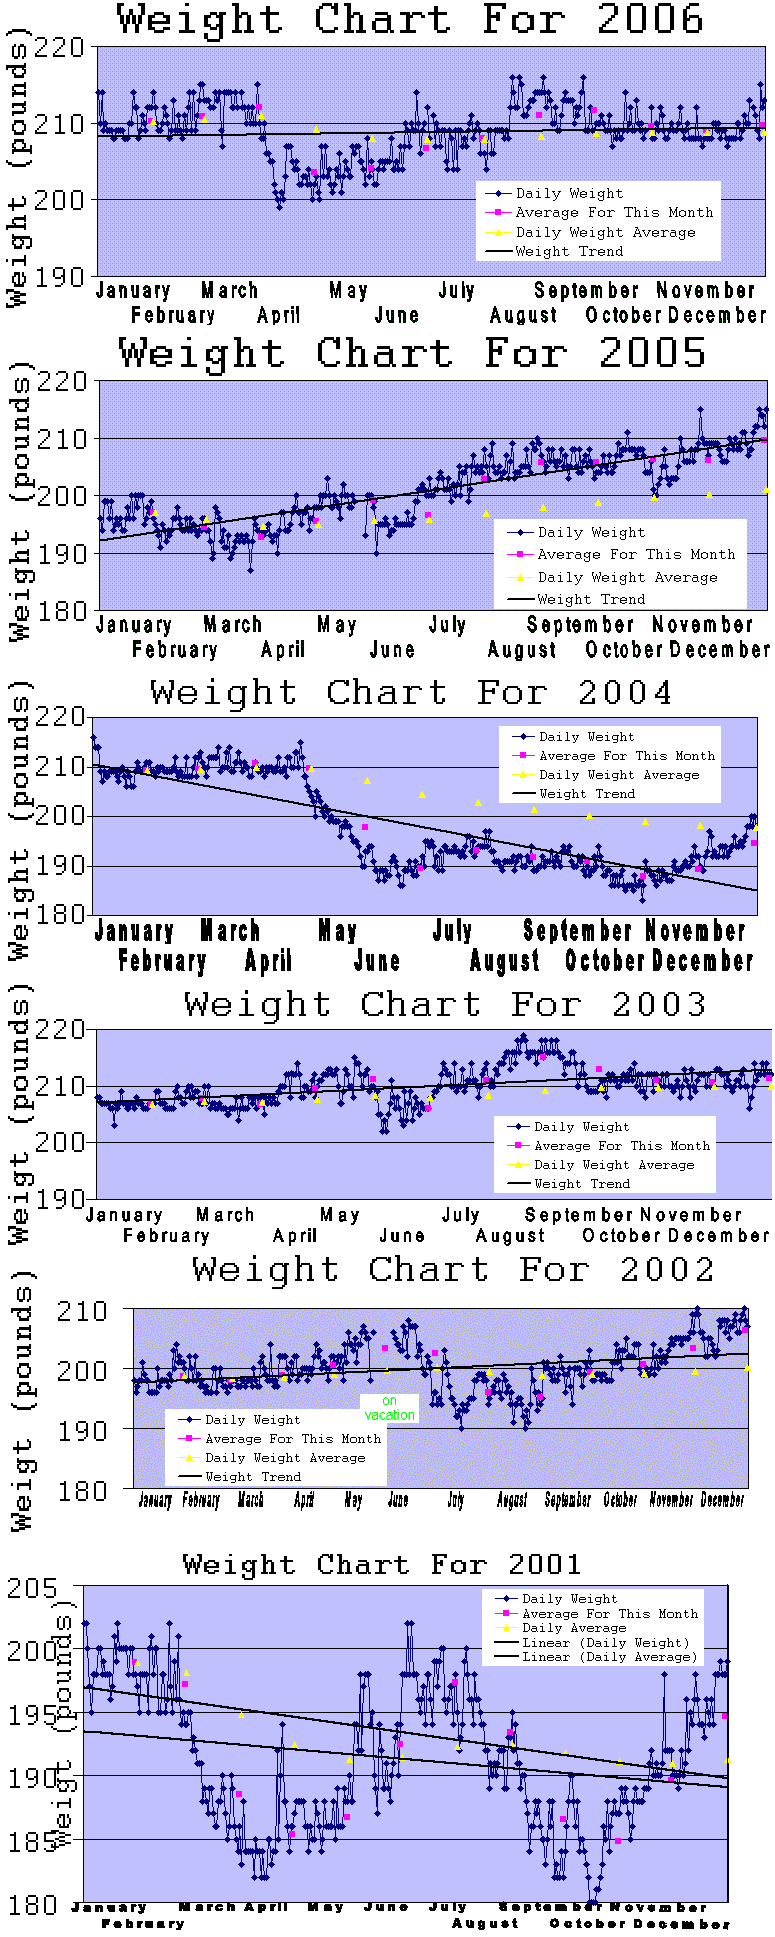 Past Weight Charts